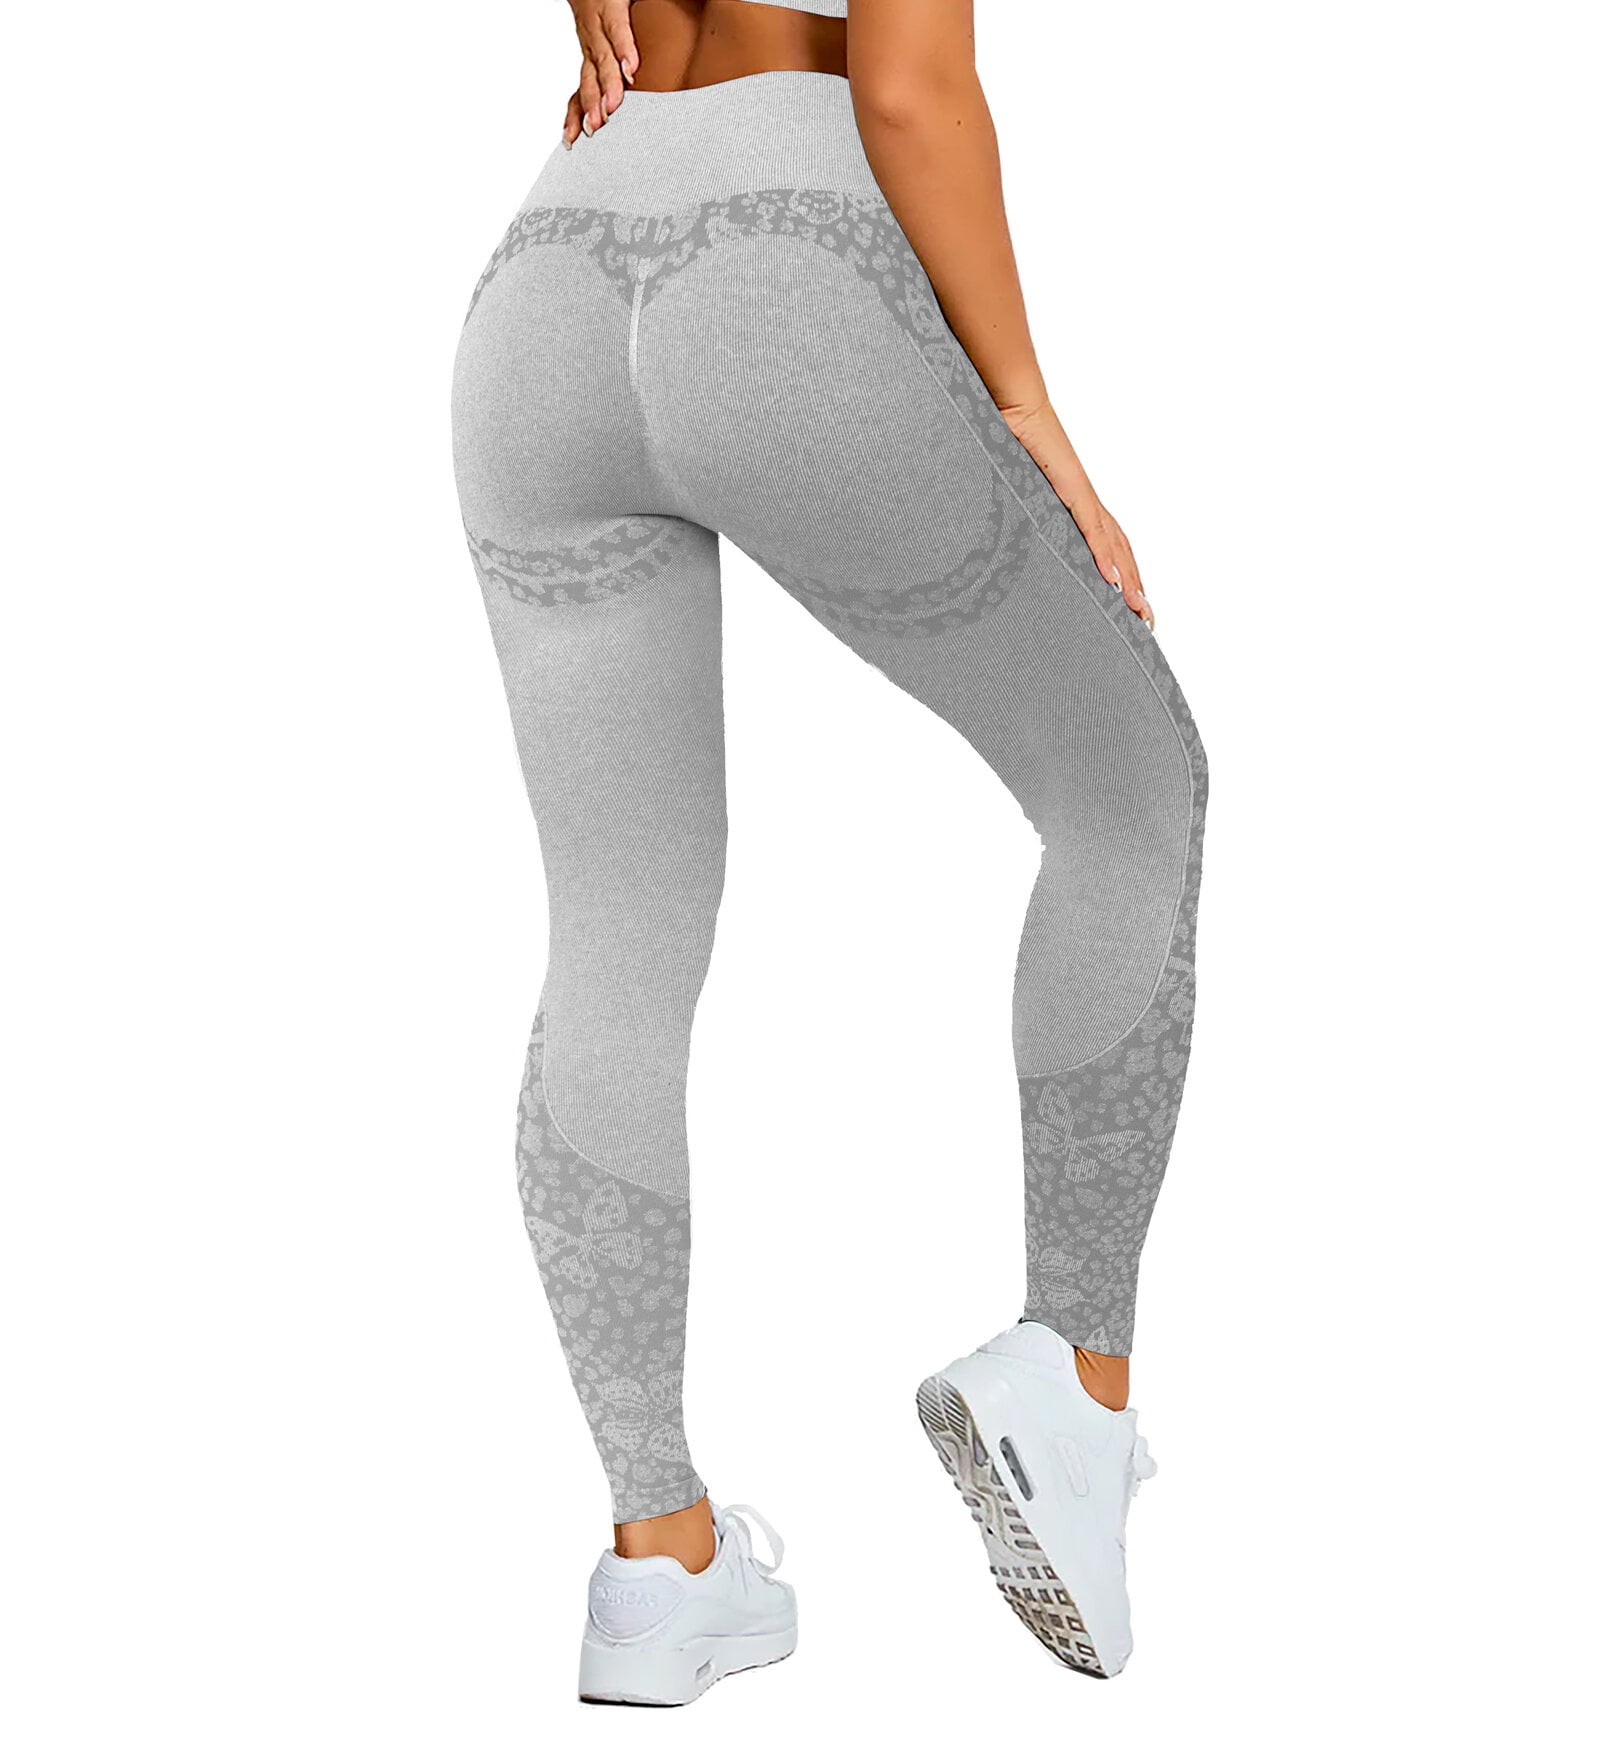 Grey Stretch Fit Shaping Butt Lifting Leggings - Solid 